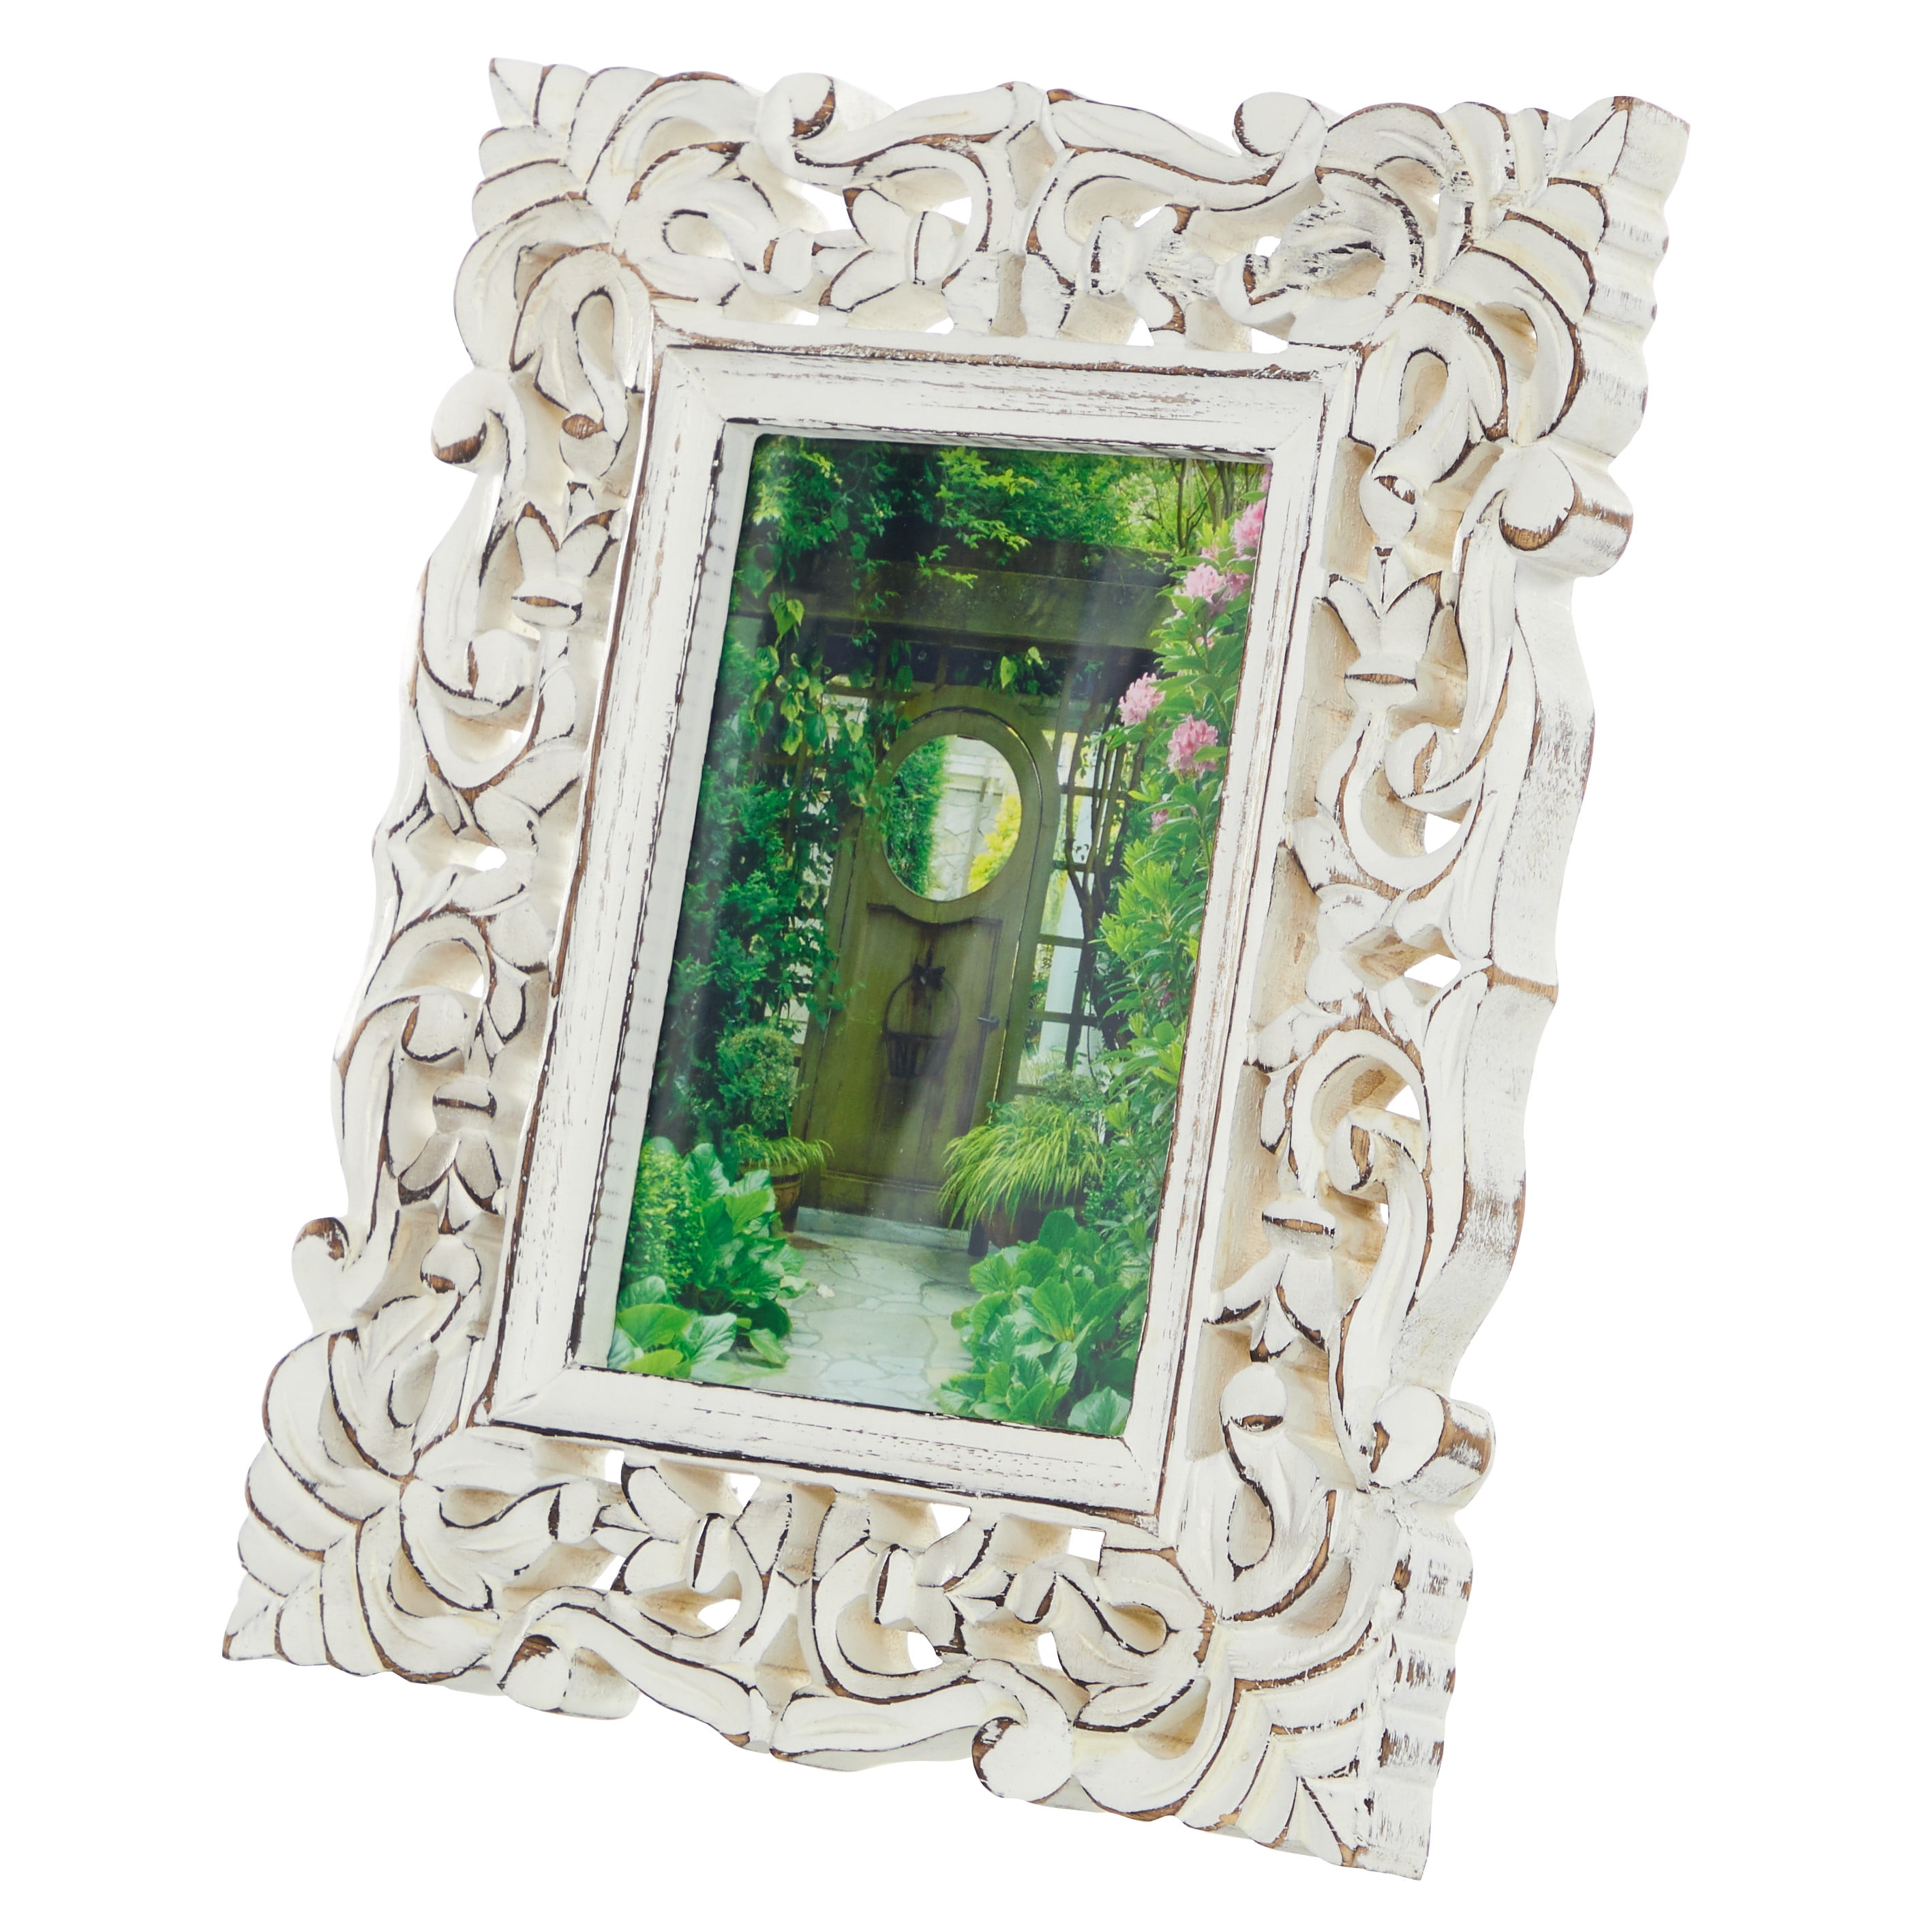 Mud Pie Rustic Metal Picture Frames Photos Large Frame 4x6 & Small